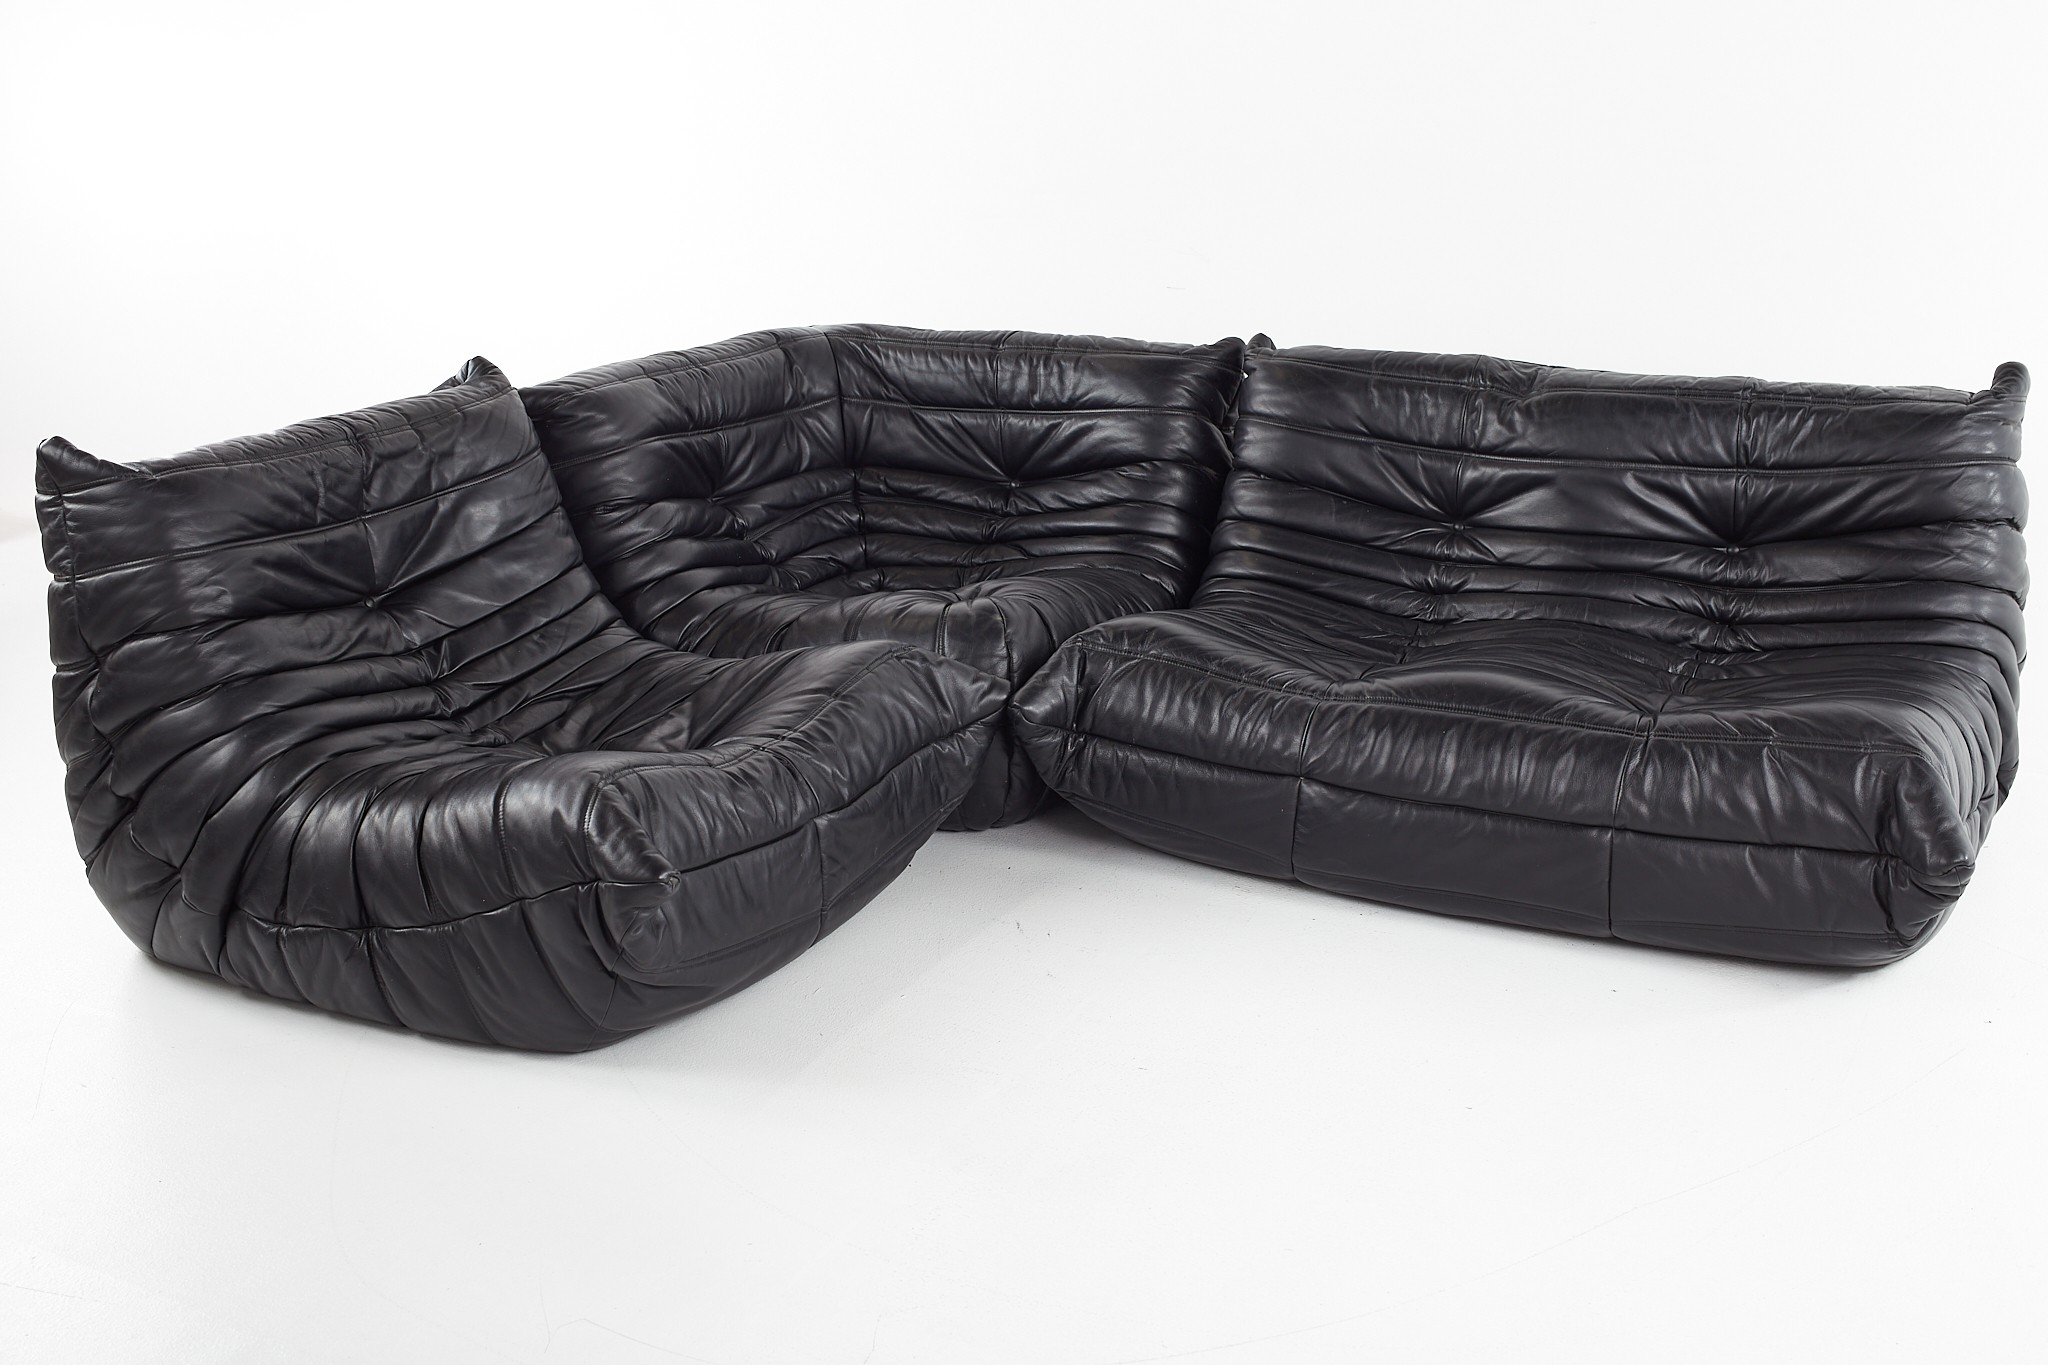 Three-Seater Sofa 'Togo' by Michel Ducaroy for Ligne Roset